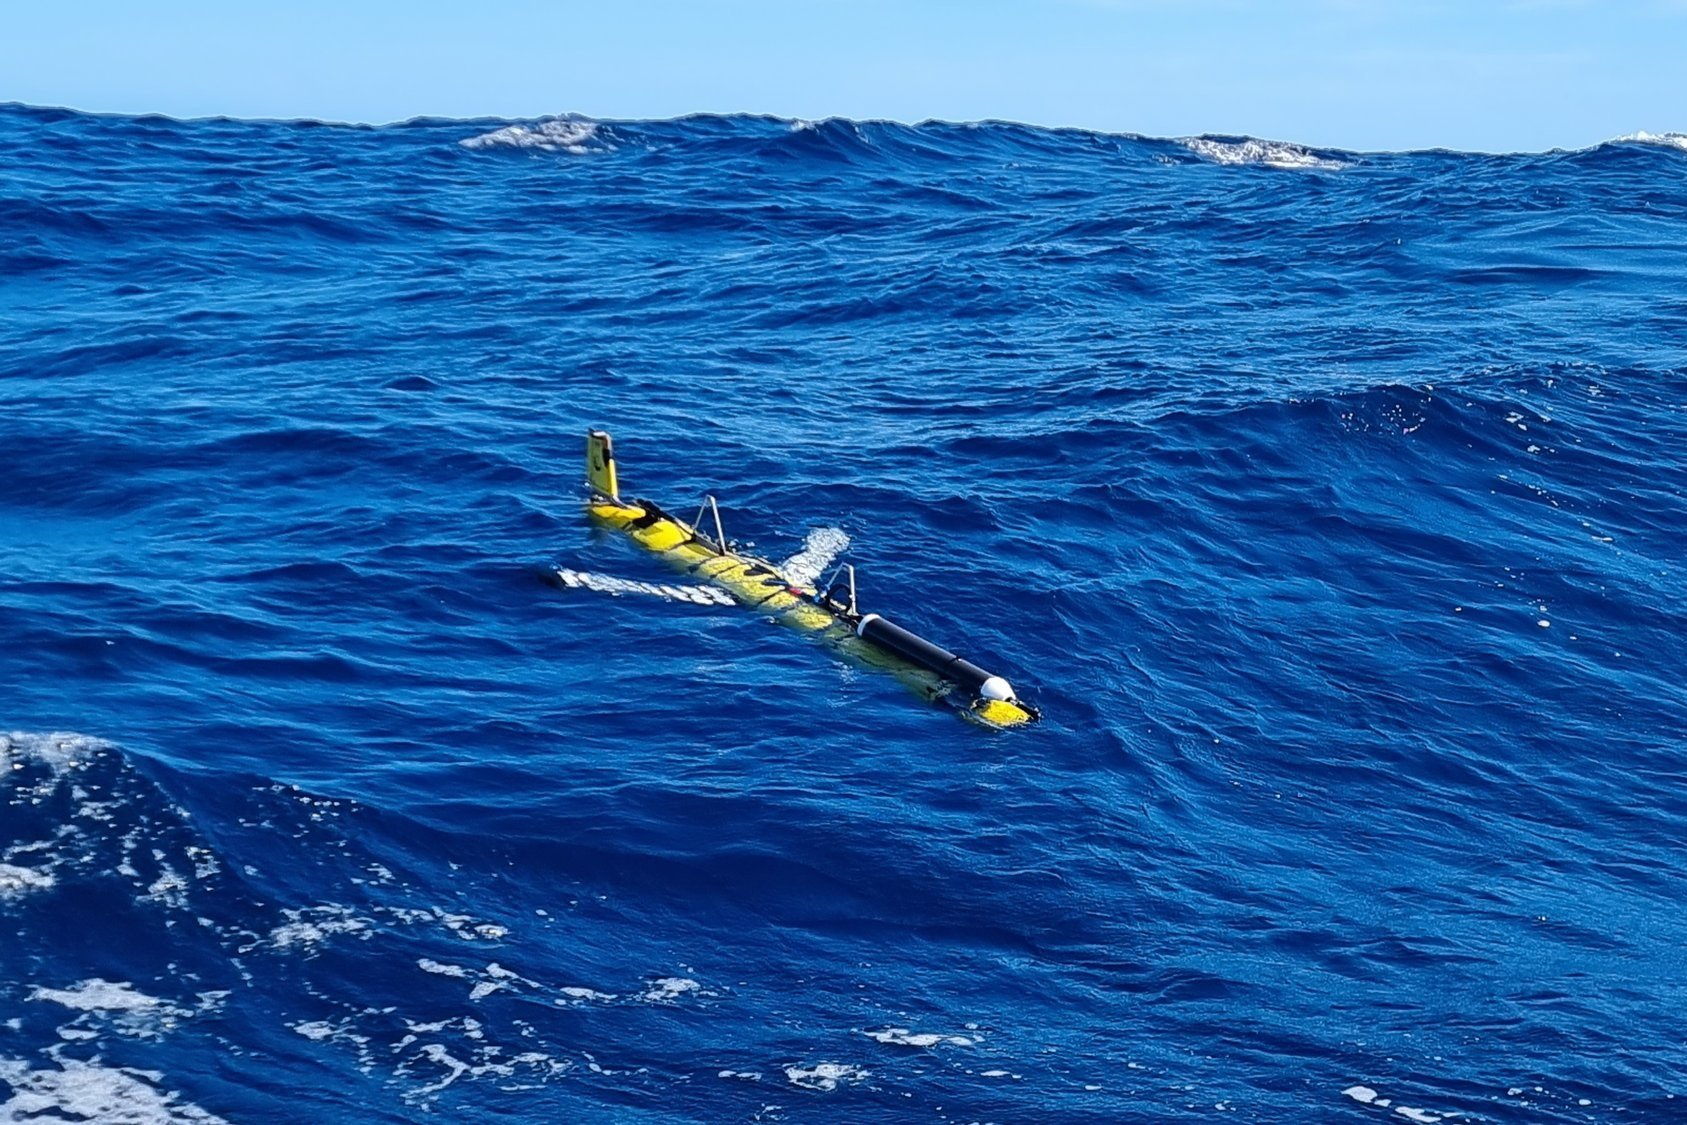  Blue Ocean Marine Tech Systems glider equipped with JASCO’s ObserverSnout, deployed for Real-Time Marine Mammal Acoustic Monitoring 